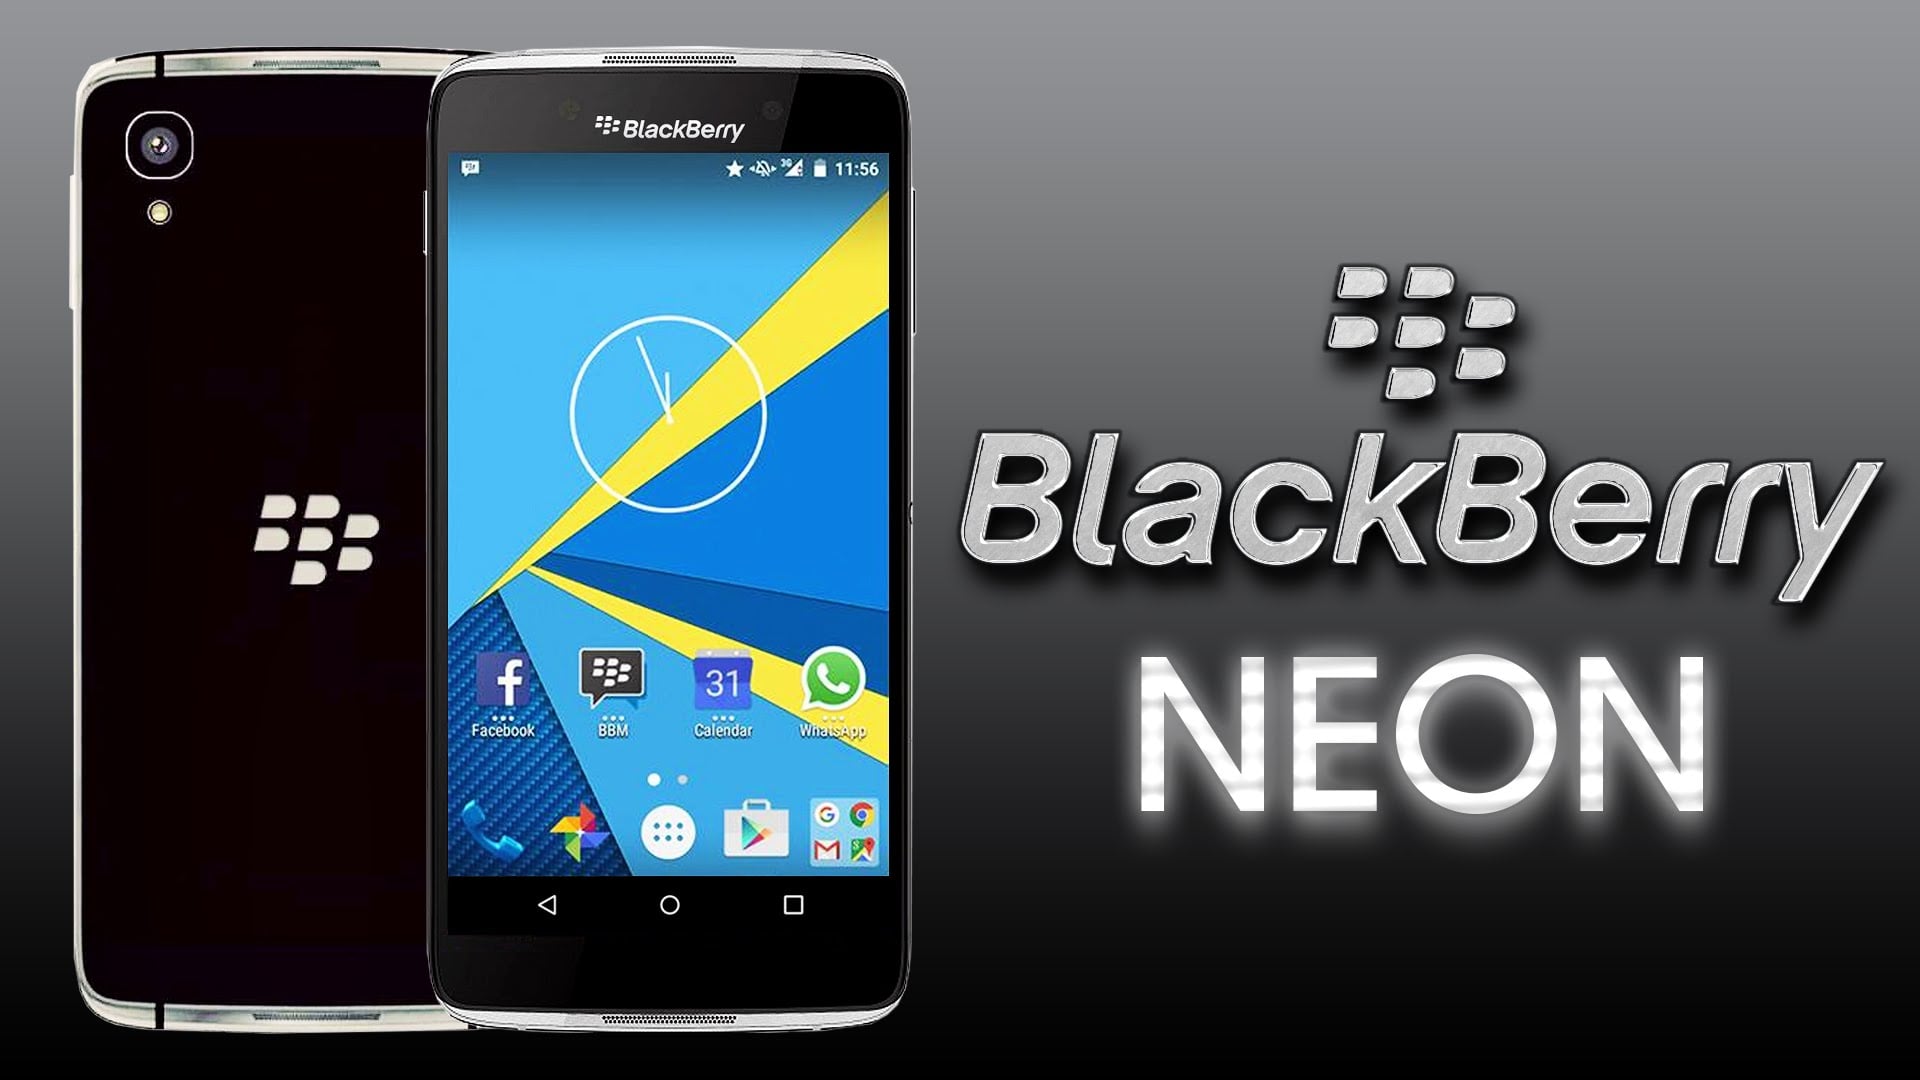 Blackberry Neon to Launch Next Month